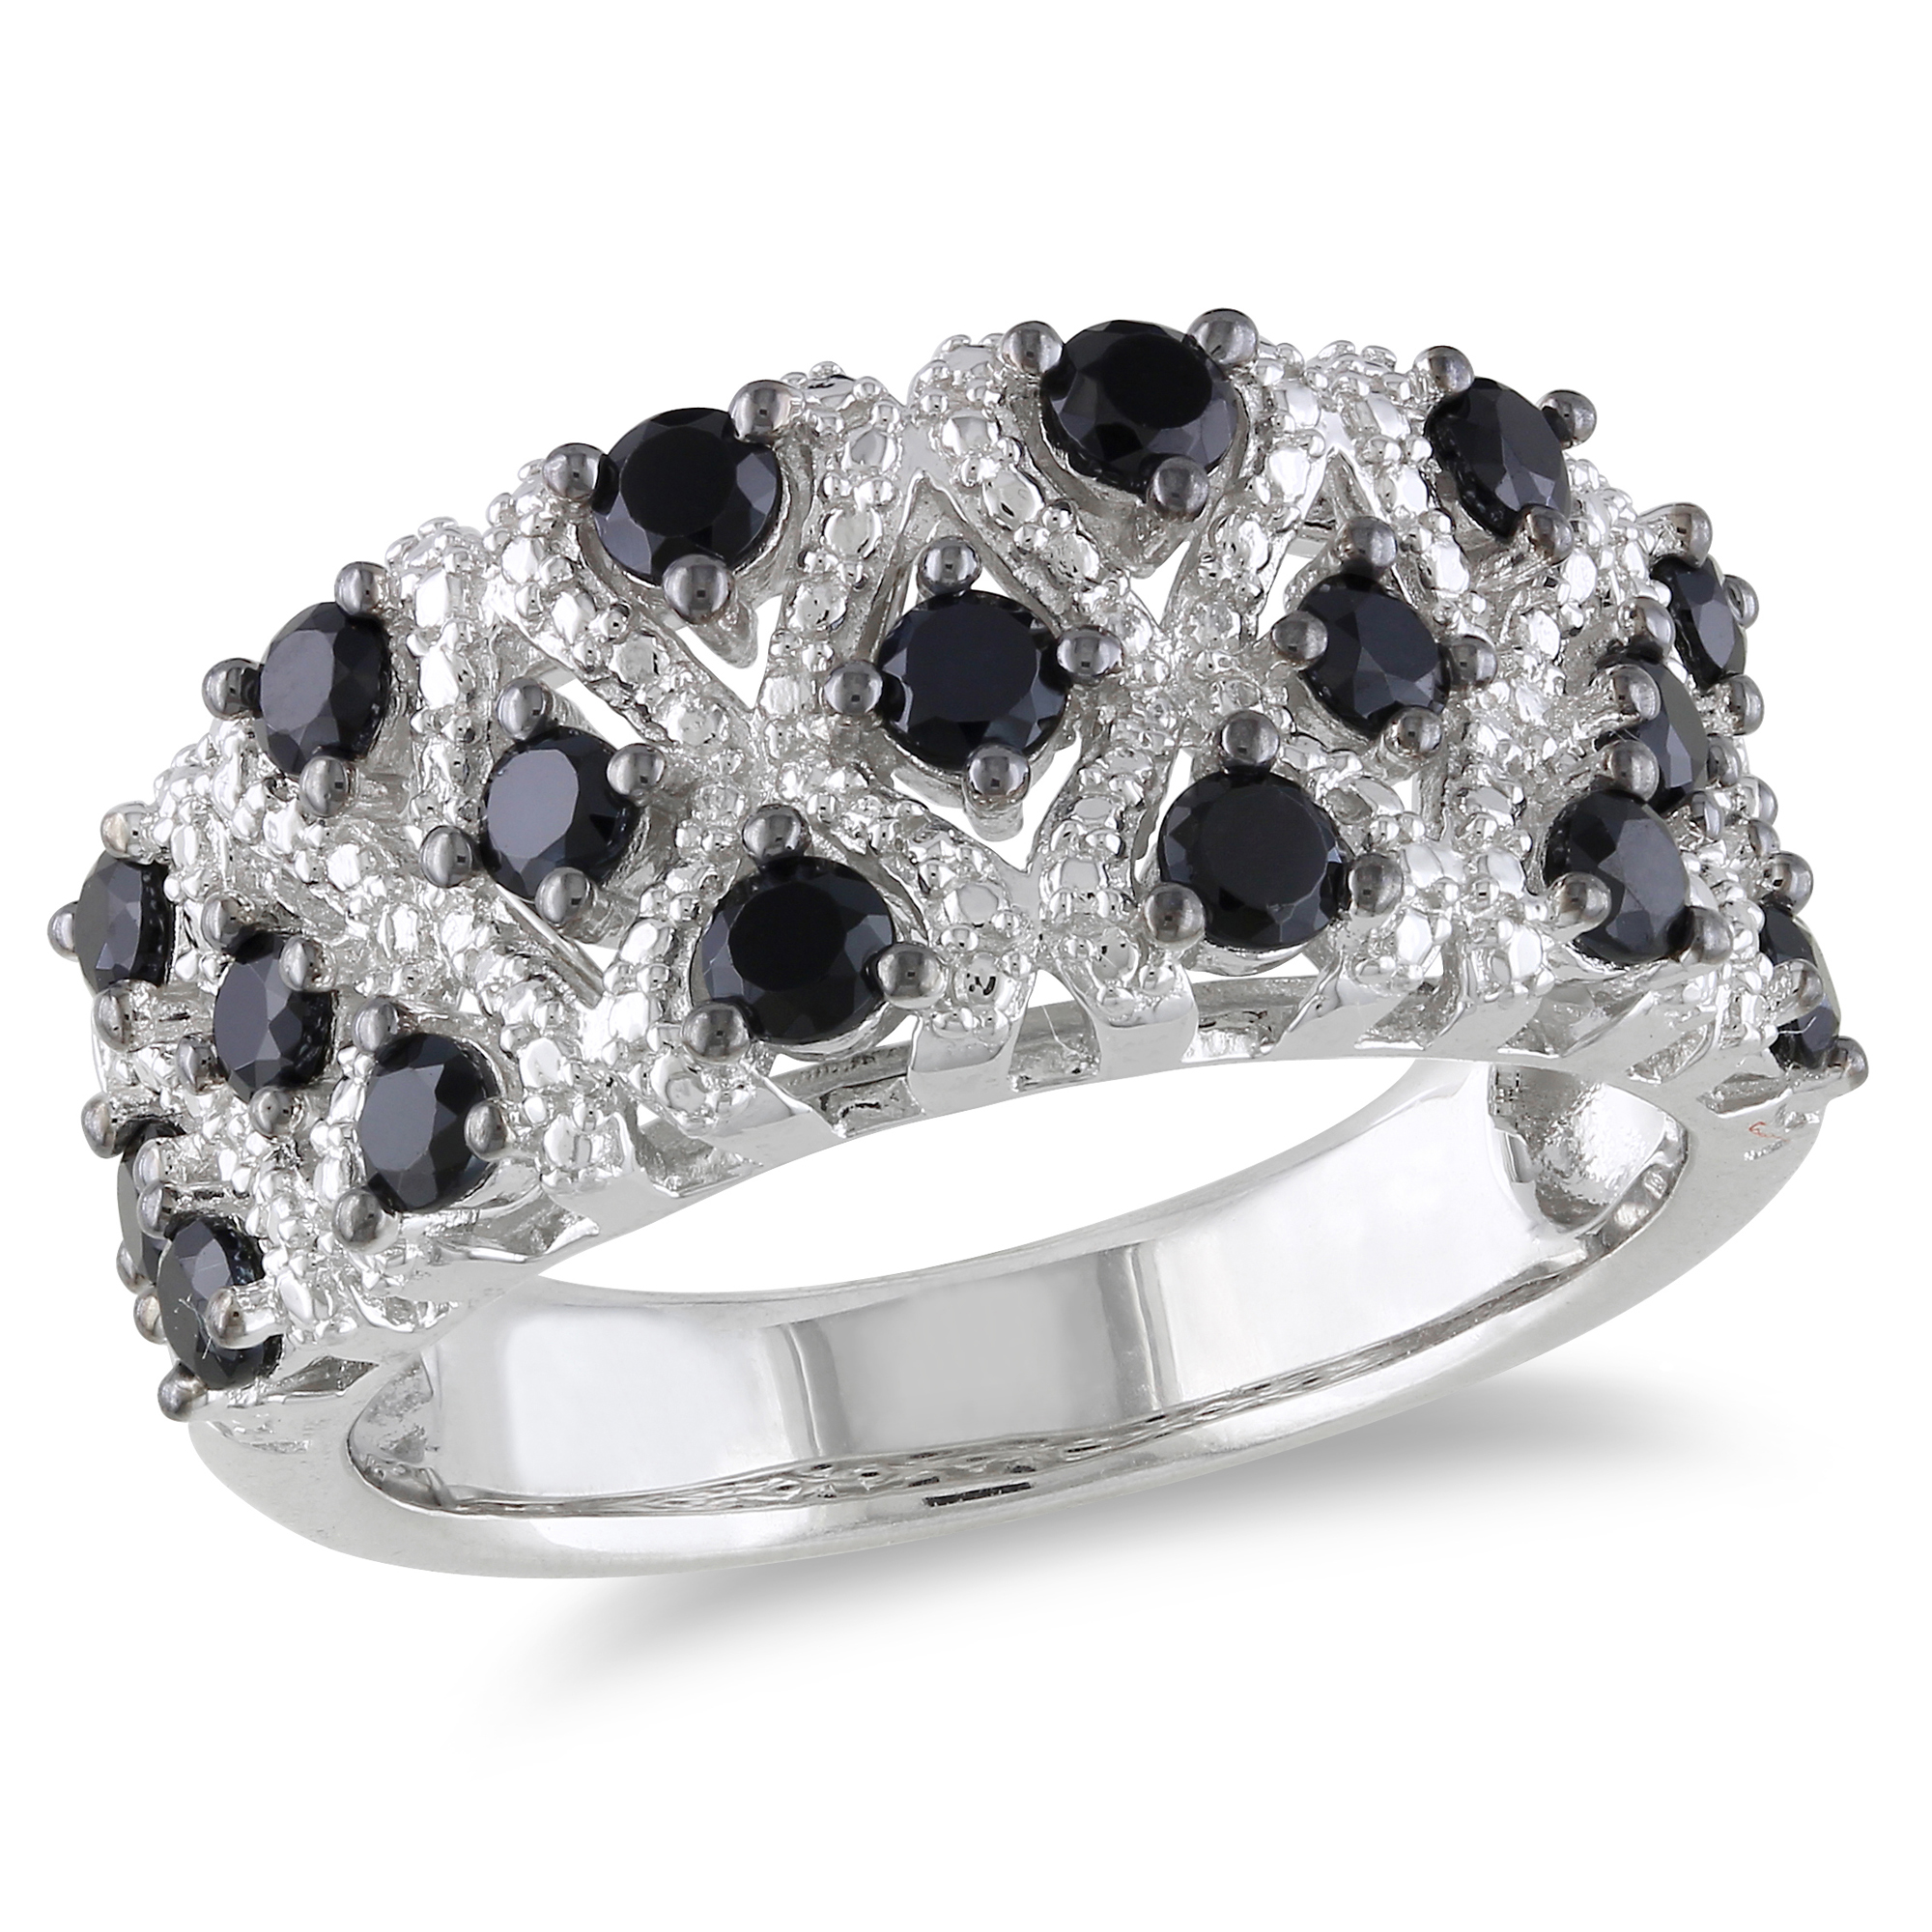 Amour 1 1/2 Carat T.G.W. Black Spinel Fashion Ring in Sterling Silver Black Plated